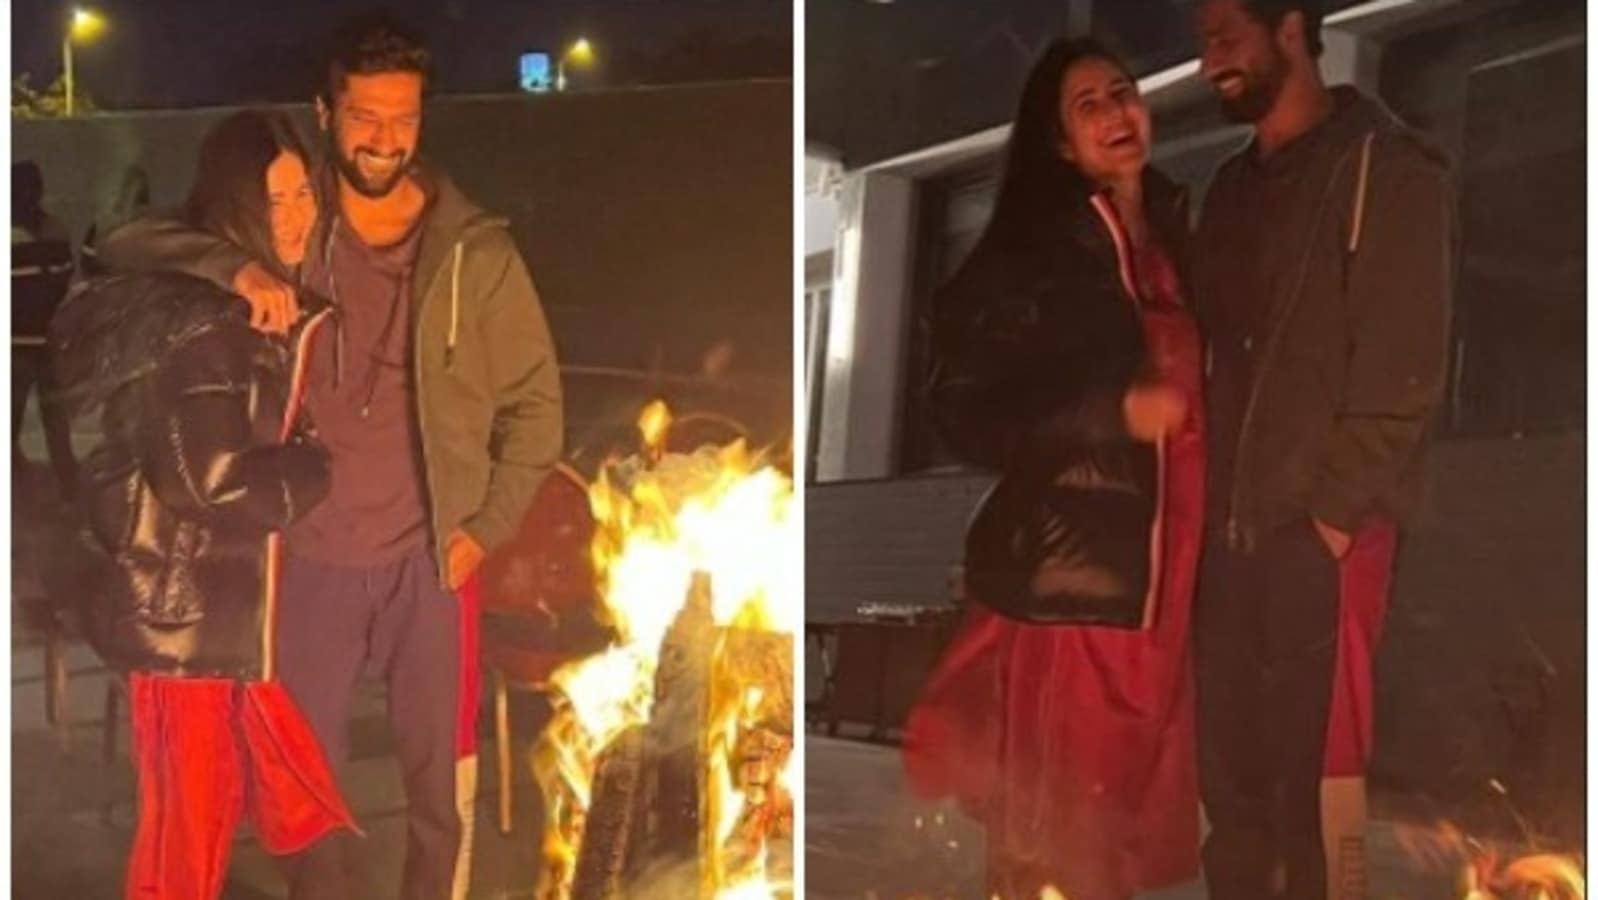 Katrina Kaif, Vicky Kaushal snuggle up around bonfire as they celebrate  first Lohri after marriage. See pics - Hindustan Times